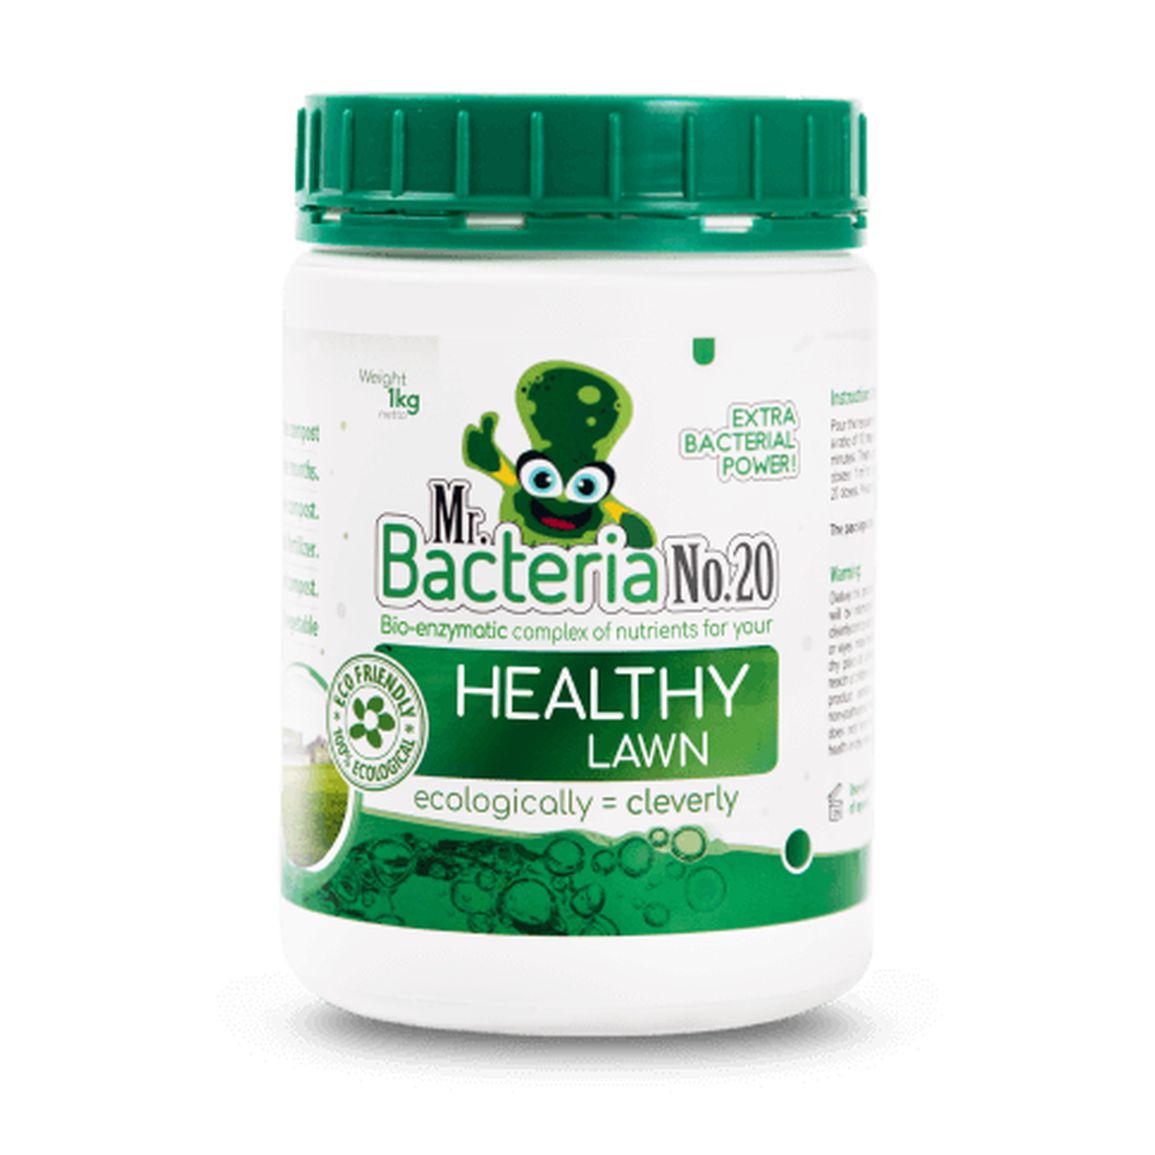 Bio-enzymatic complex of nutrients for your maintaing a Healthy Lawn - 1000g